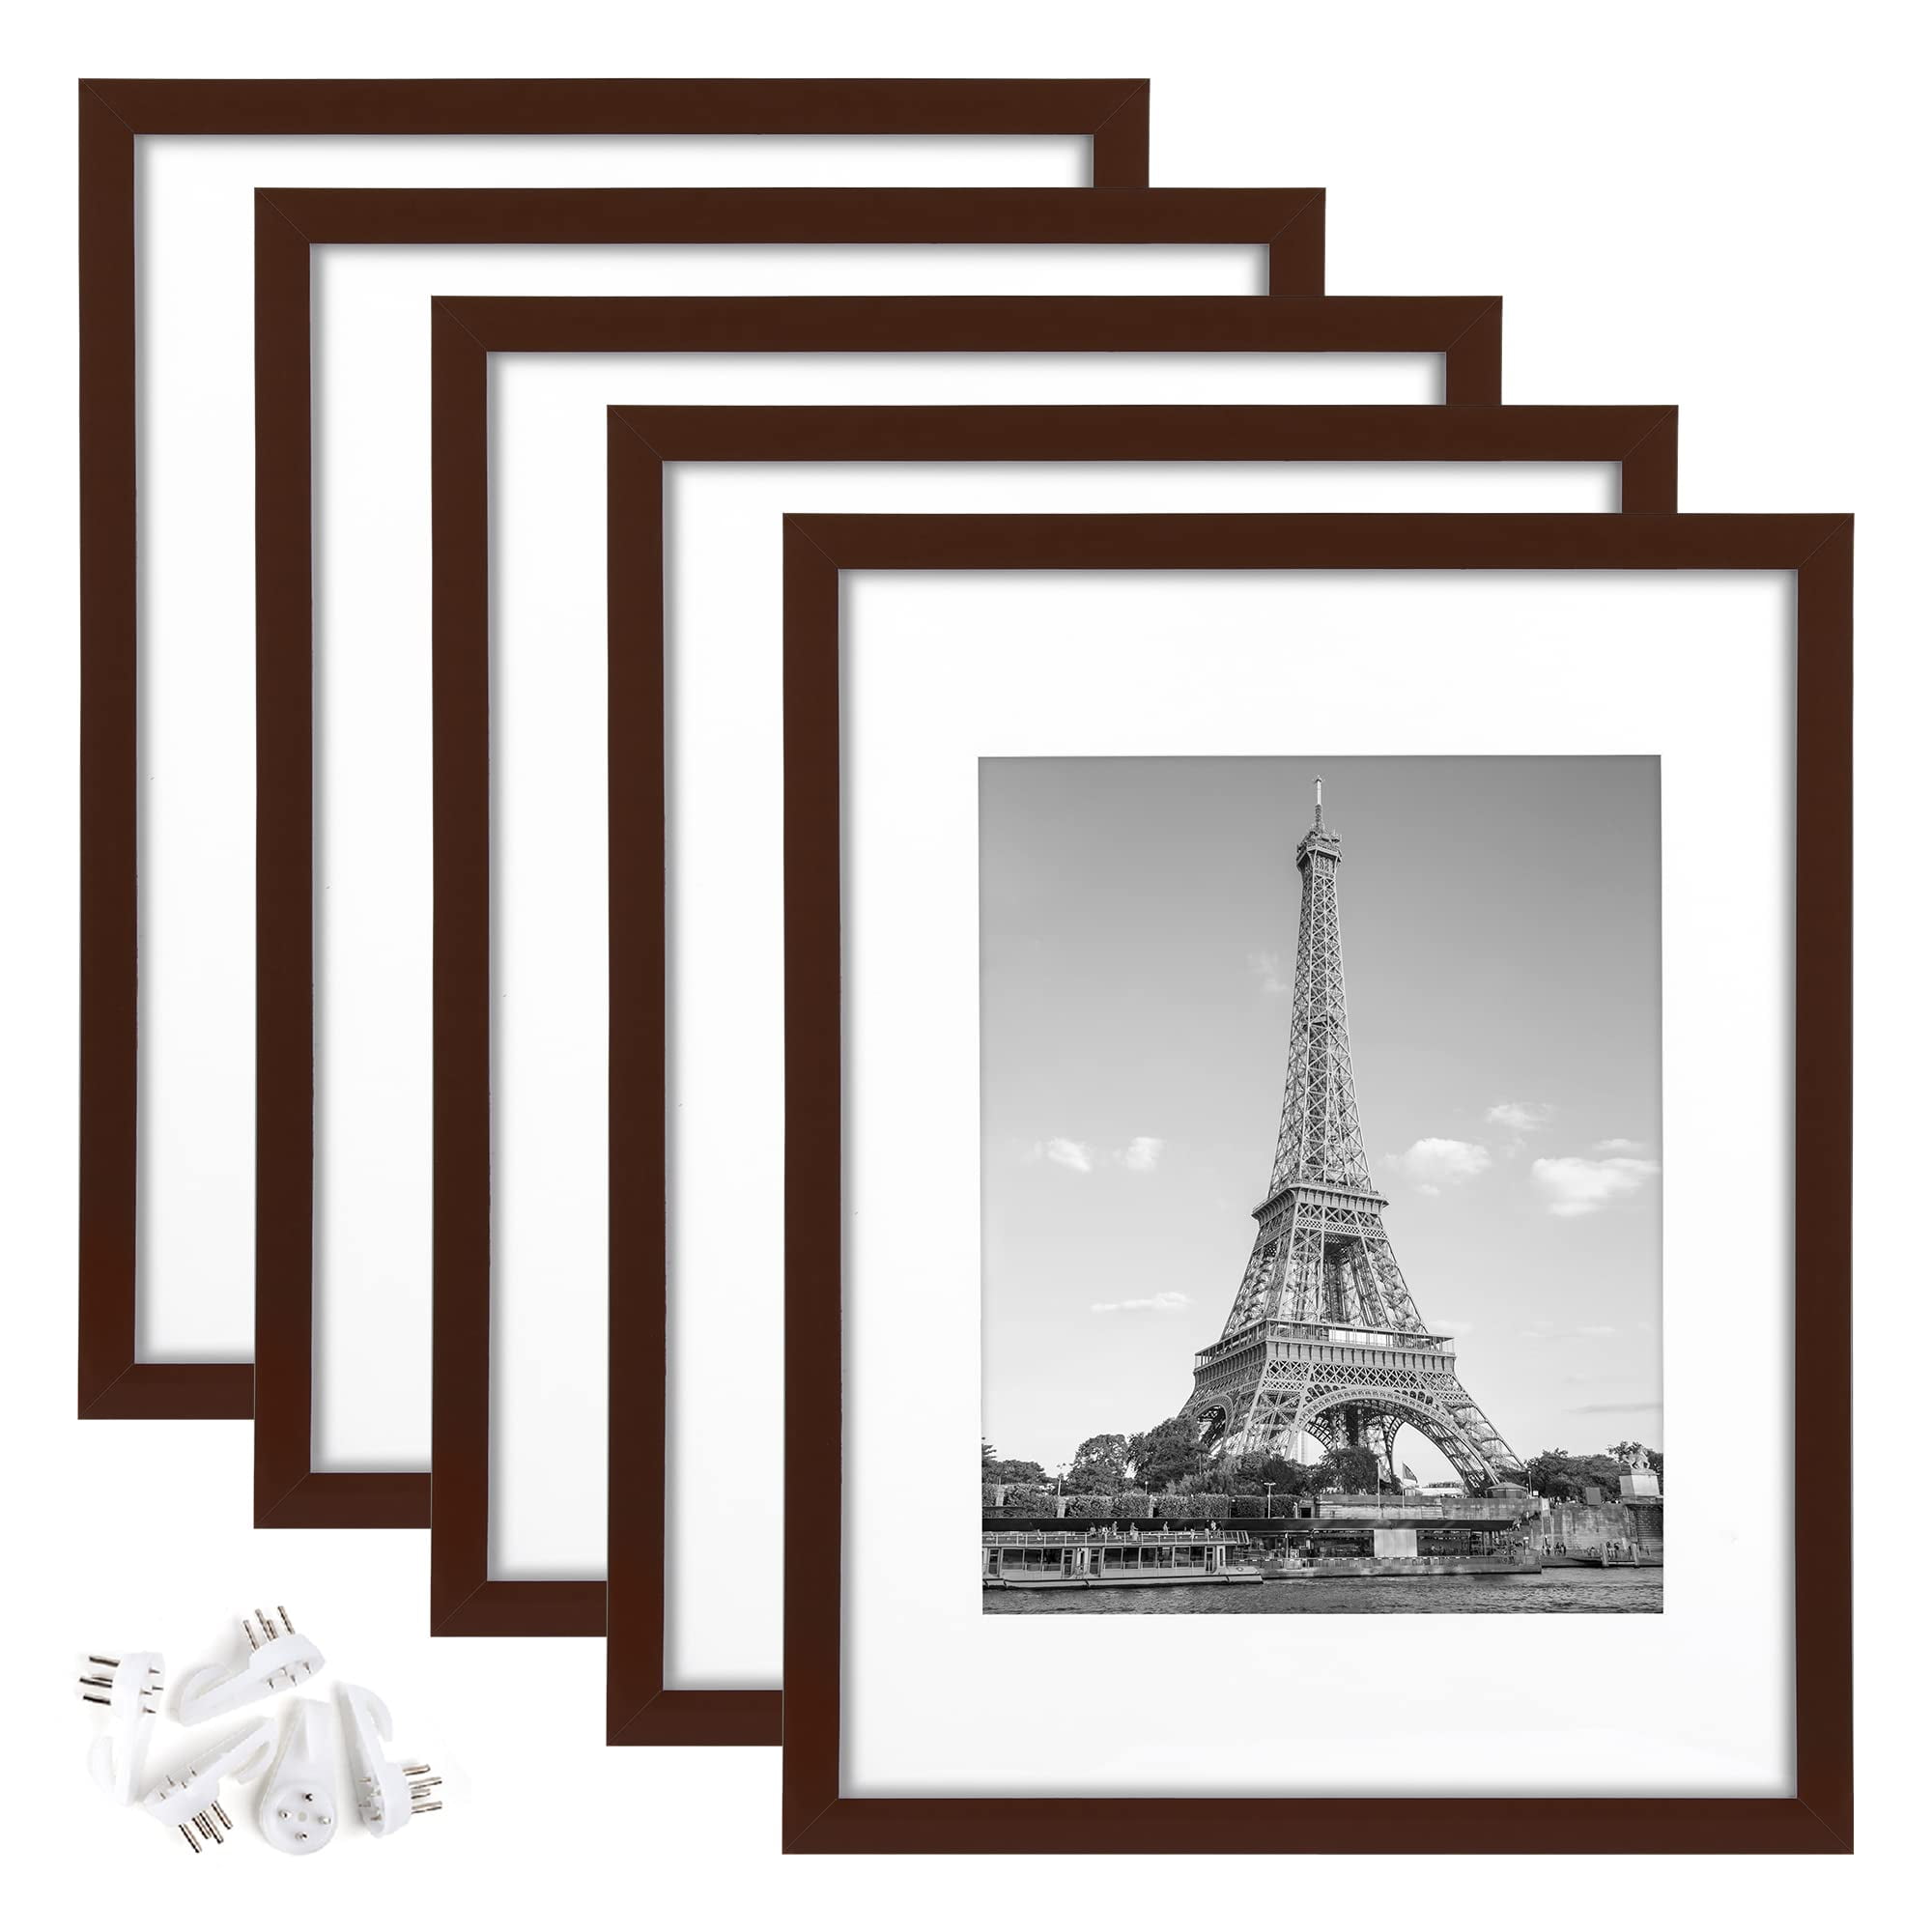 upsimples 16x20 Picture Frame Set of 5, Display Pictures 11x14 with Mat or  16x20 Without Mat,Wall Gallery Poster Frames,Black/Gold/White/Navy Blue